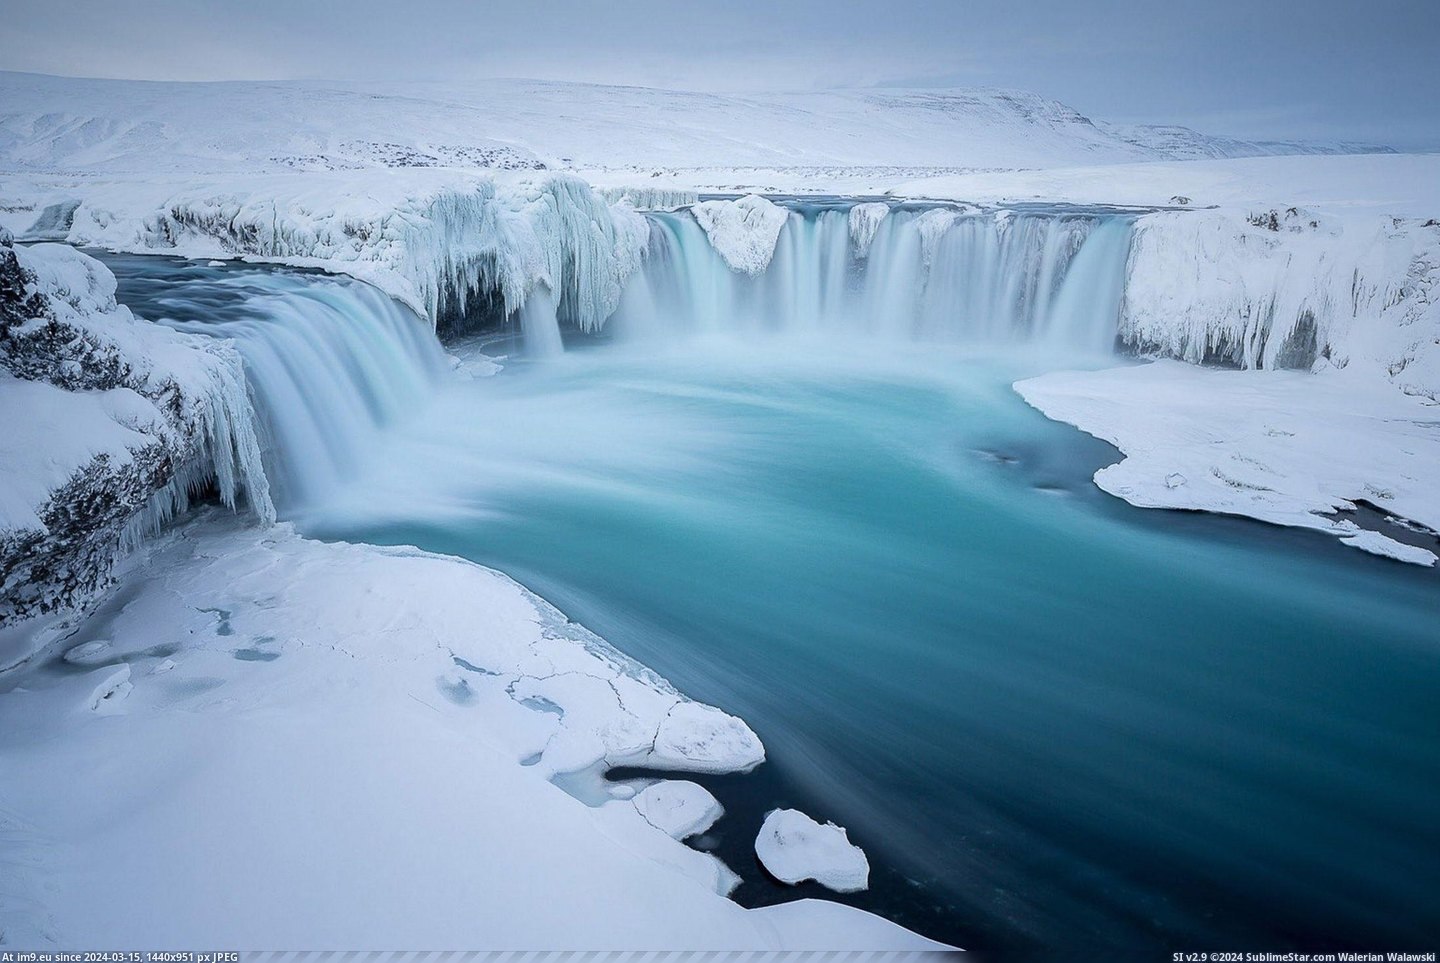 #Wallpaper #Beautiful #Wide #Gods #Afoss #Holko #Iceland #Waterfall #Joshua [Earthporn] 'Waterfall of the Gods': Goðafoss, Iceland [1297x1463] by Joshua Holko Pic. (Изображение из альбом My r/EARTHPORN favs))